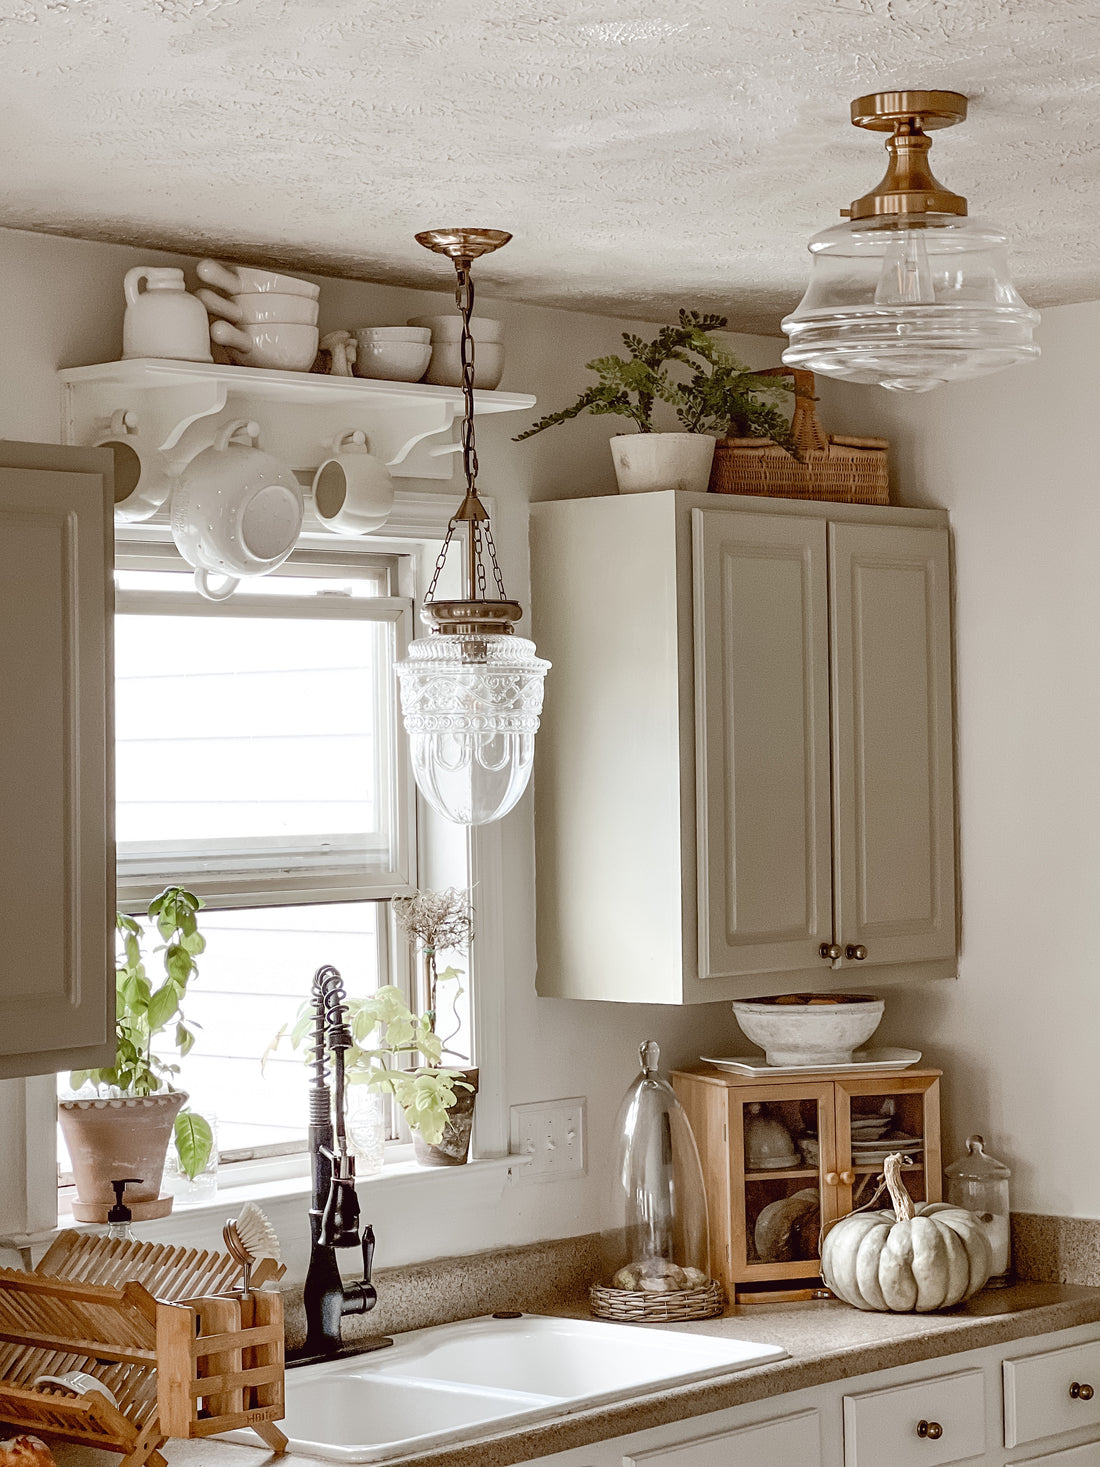 Vintage Cottage Kitchen Lighting & Mixing Metals Throughout Your Home